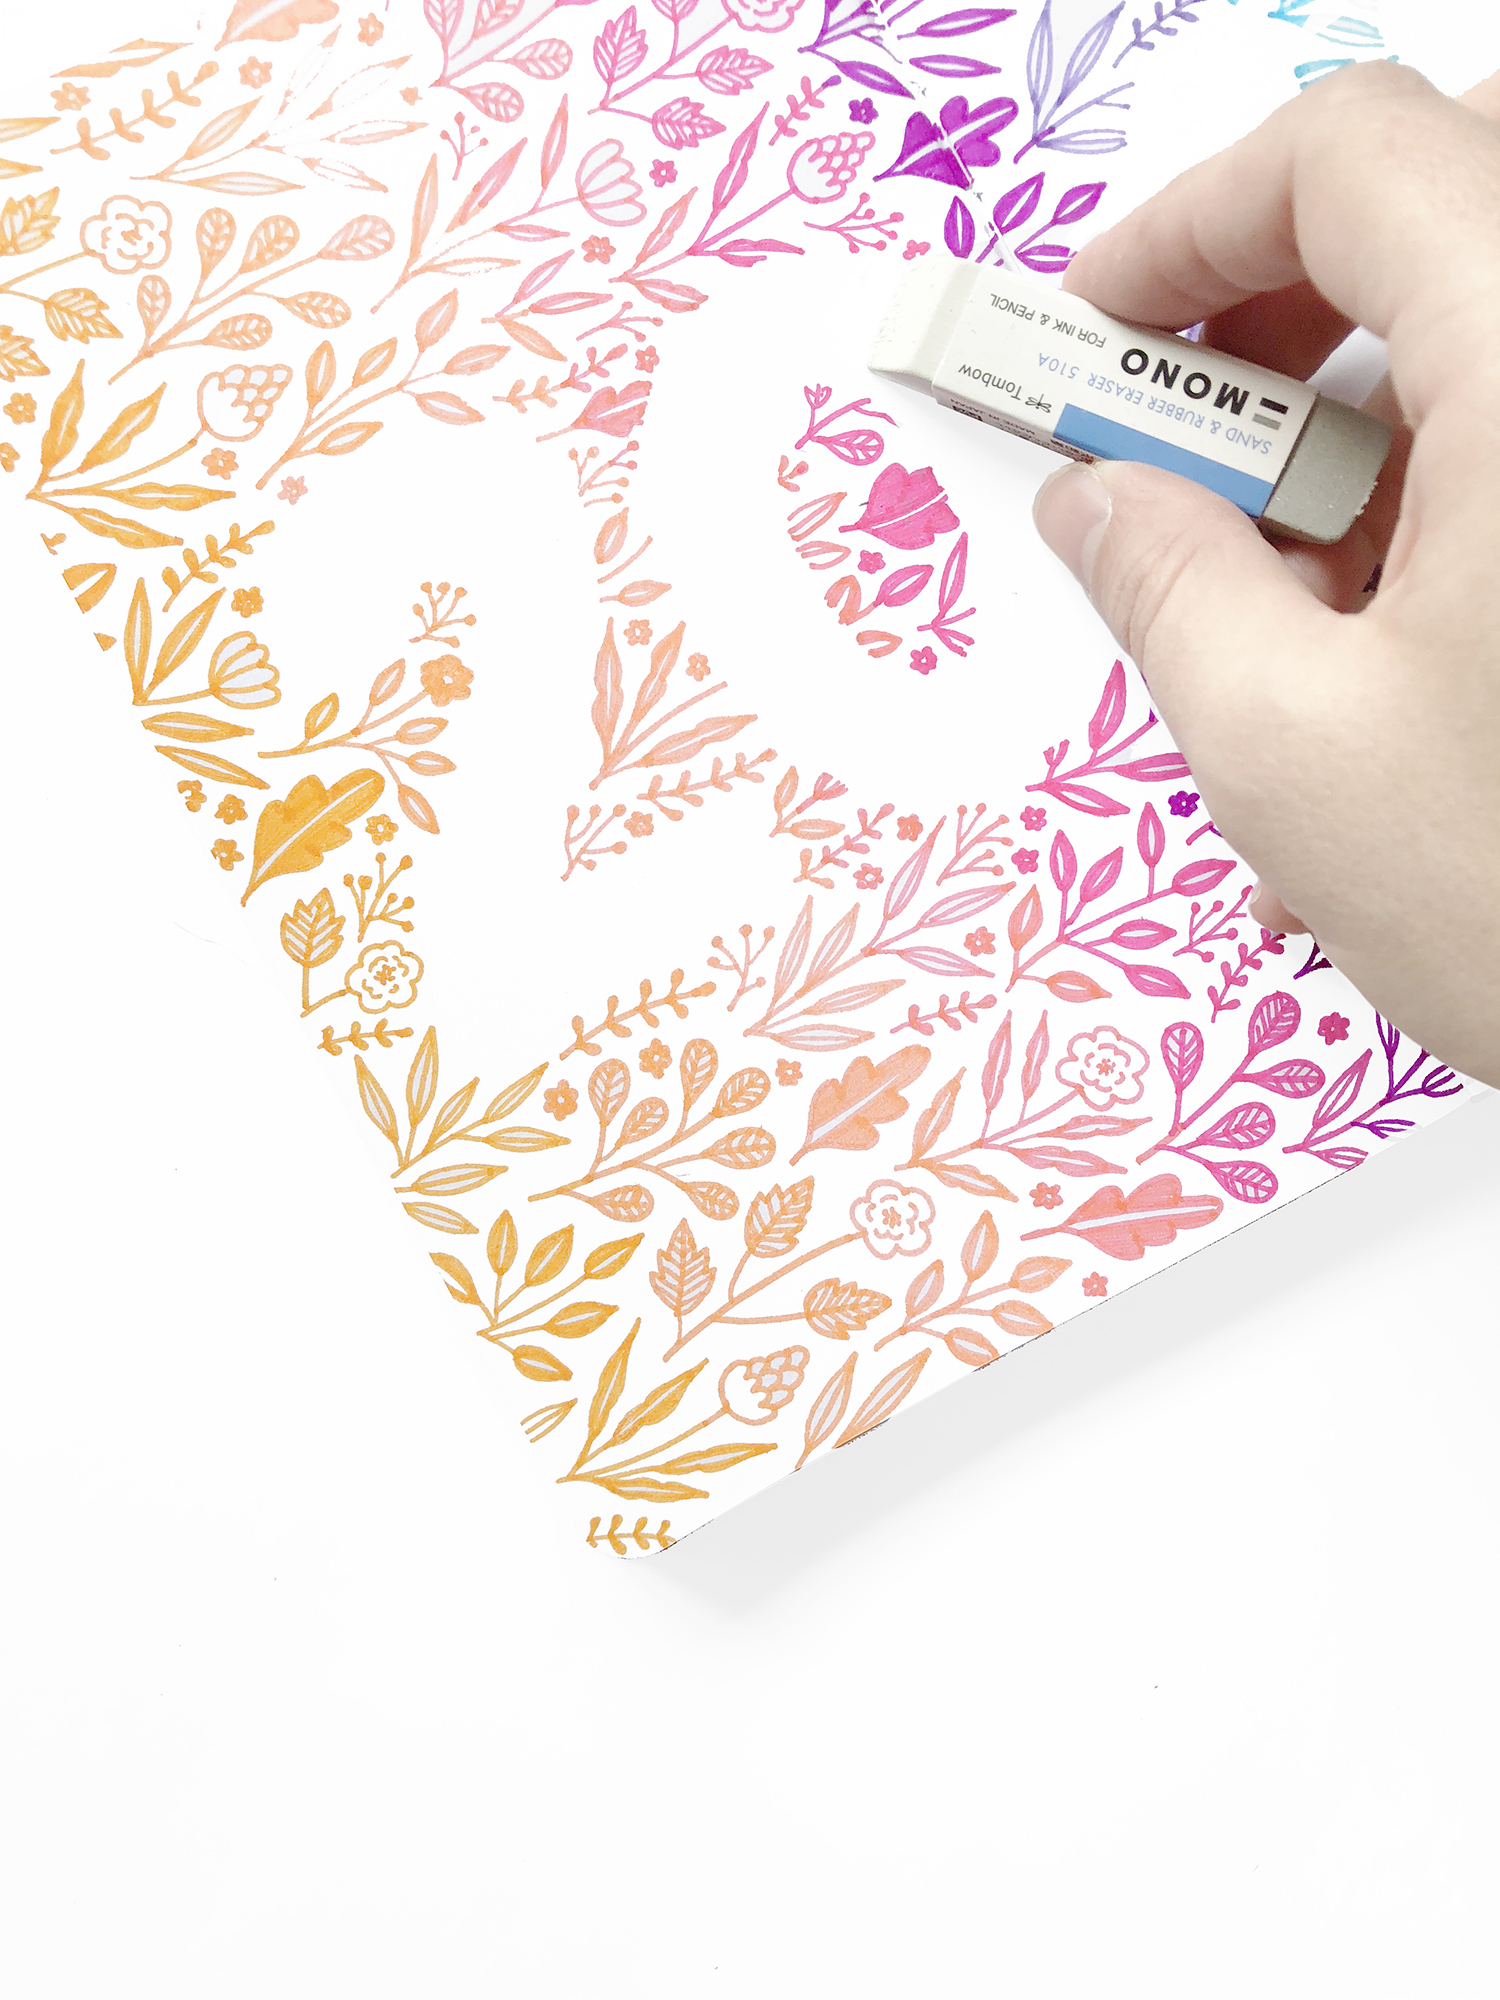 Step four in creating the Tombow TwinTone 2018 floral rainbow doodle